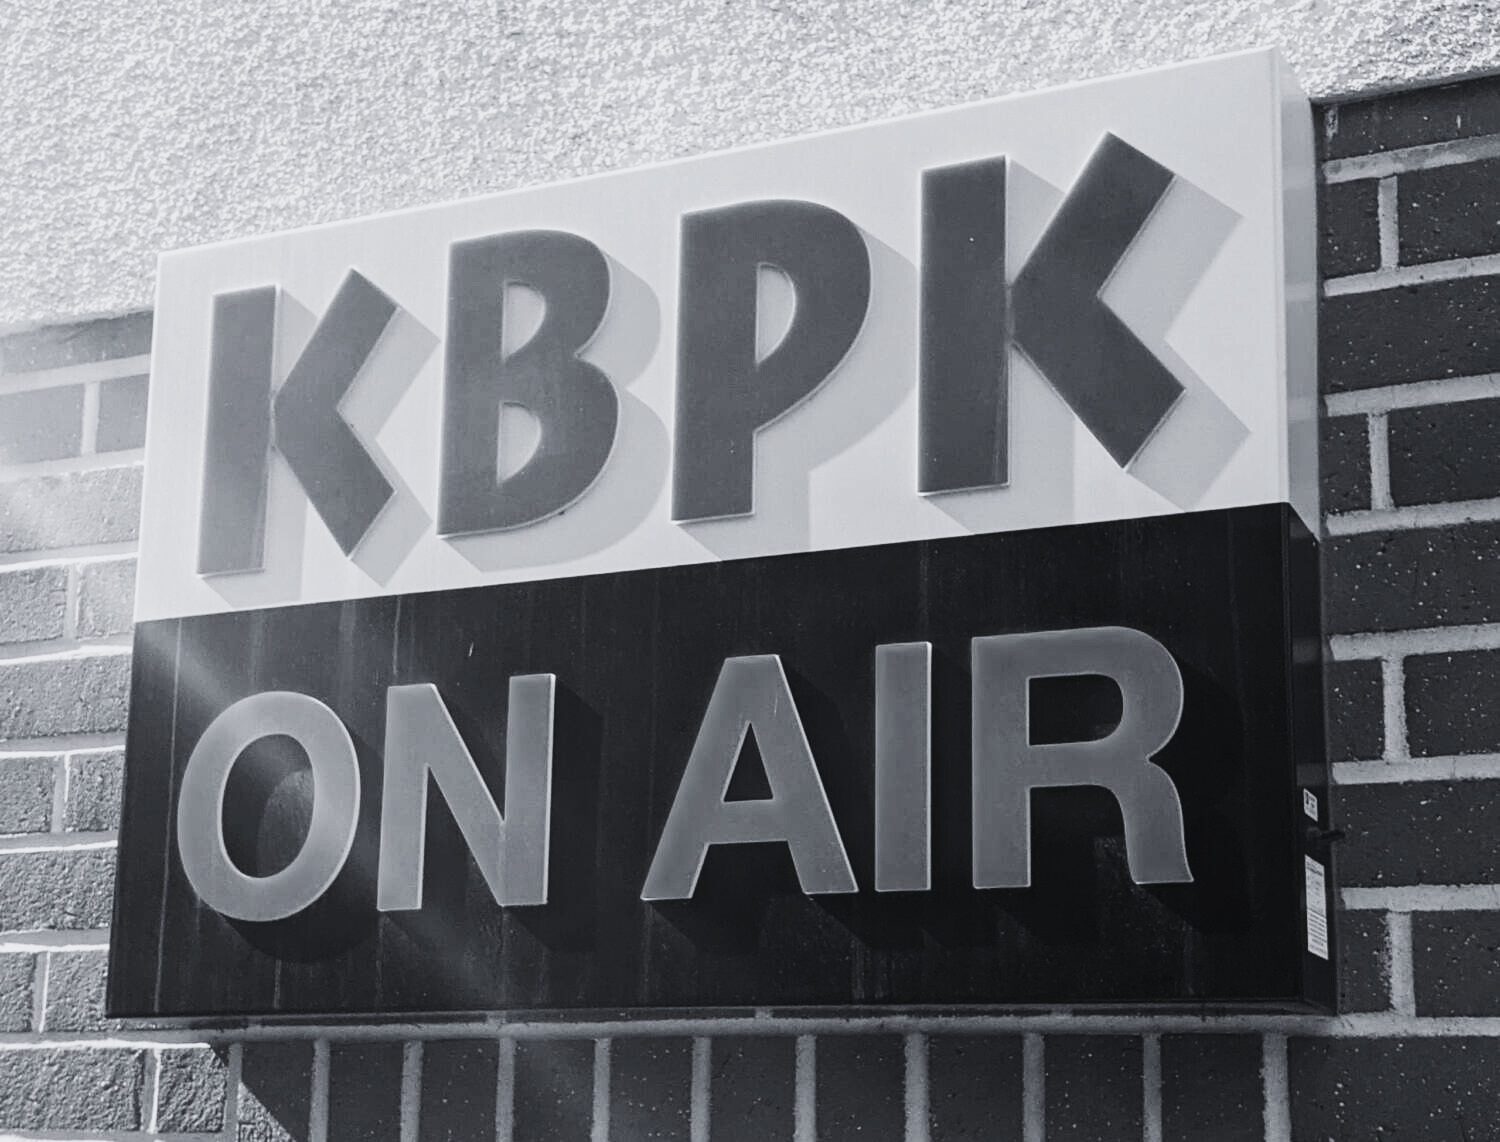 90.1 KBPK goes off of the FM airwaves permanently after 51 years